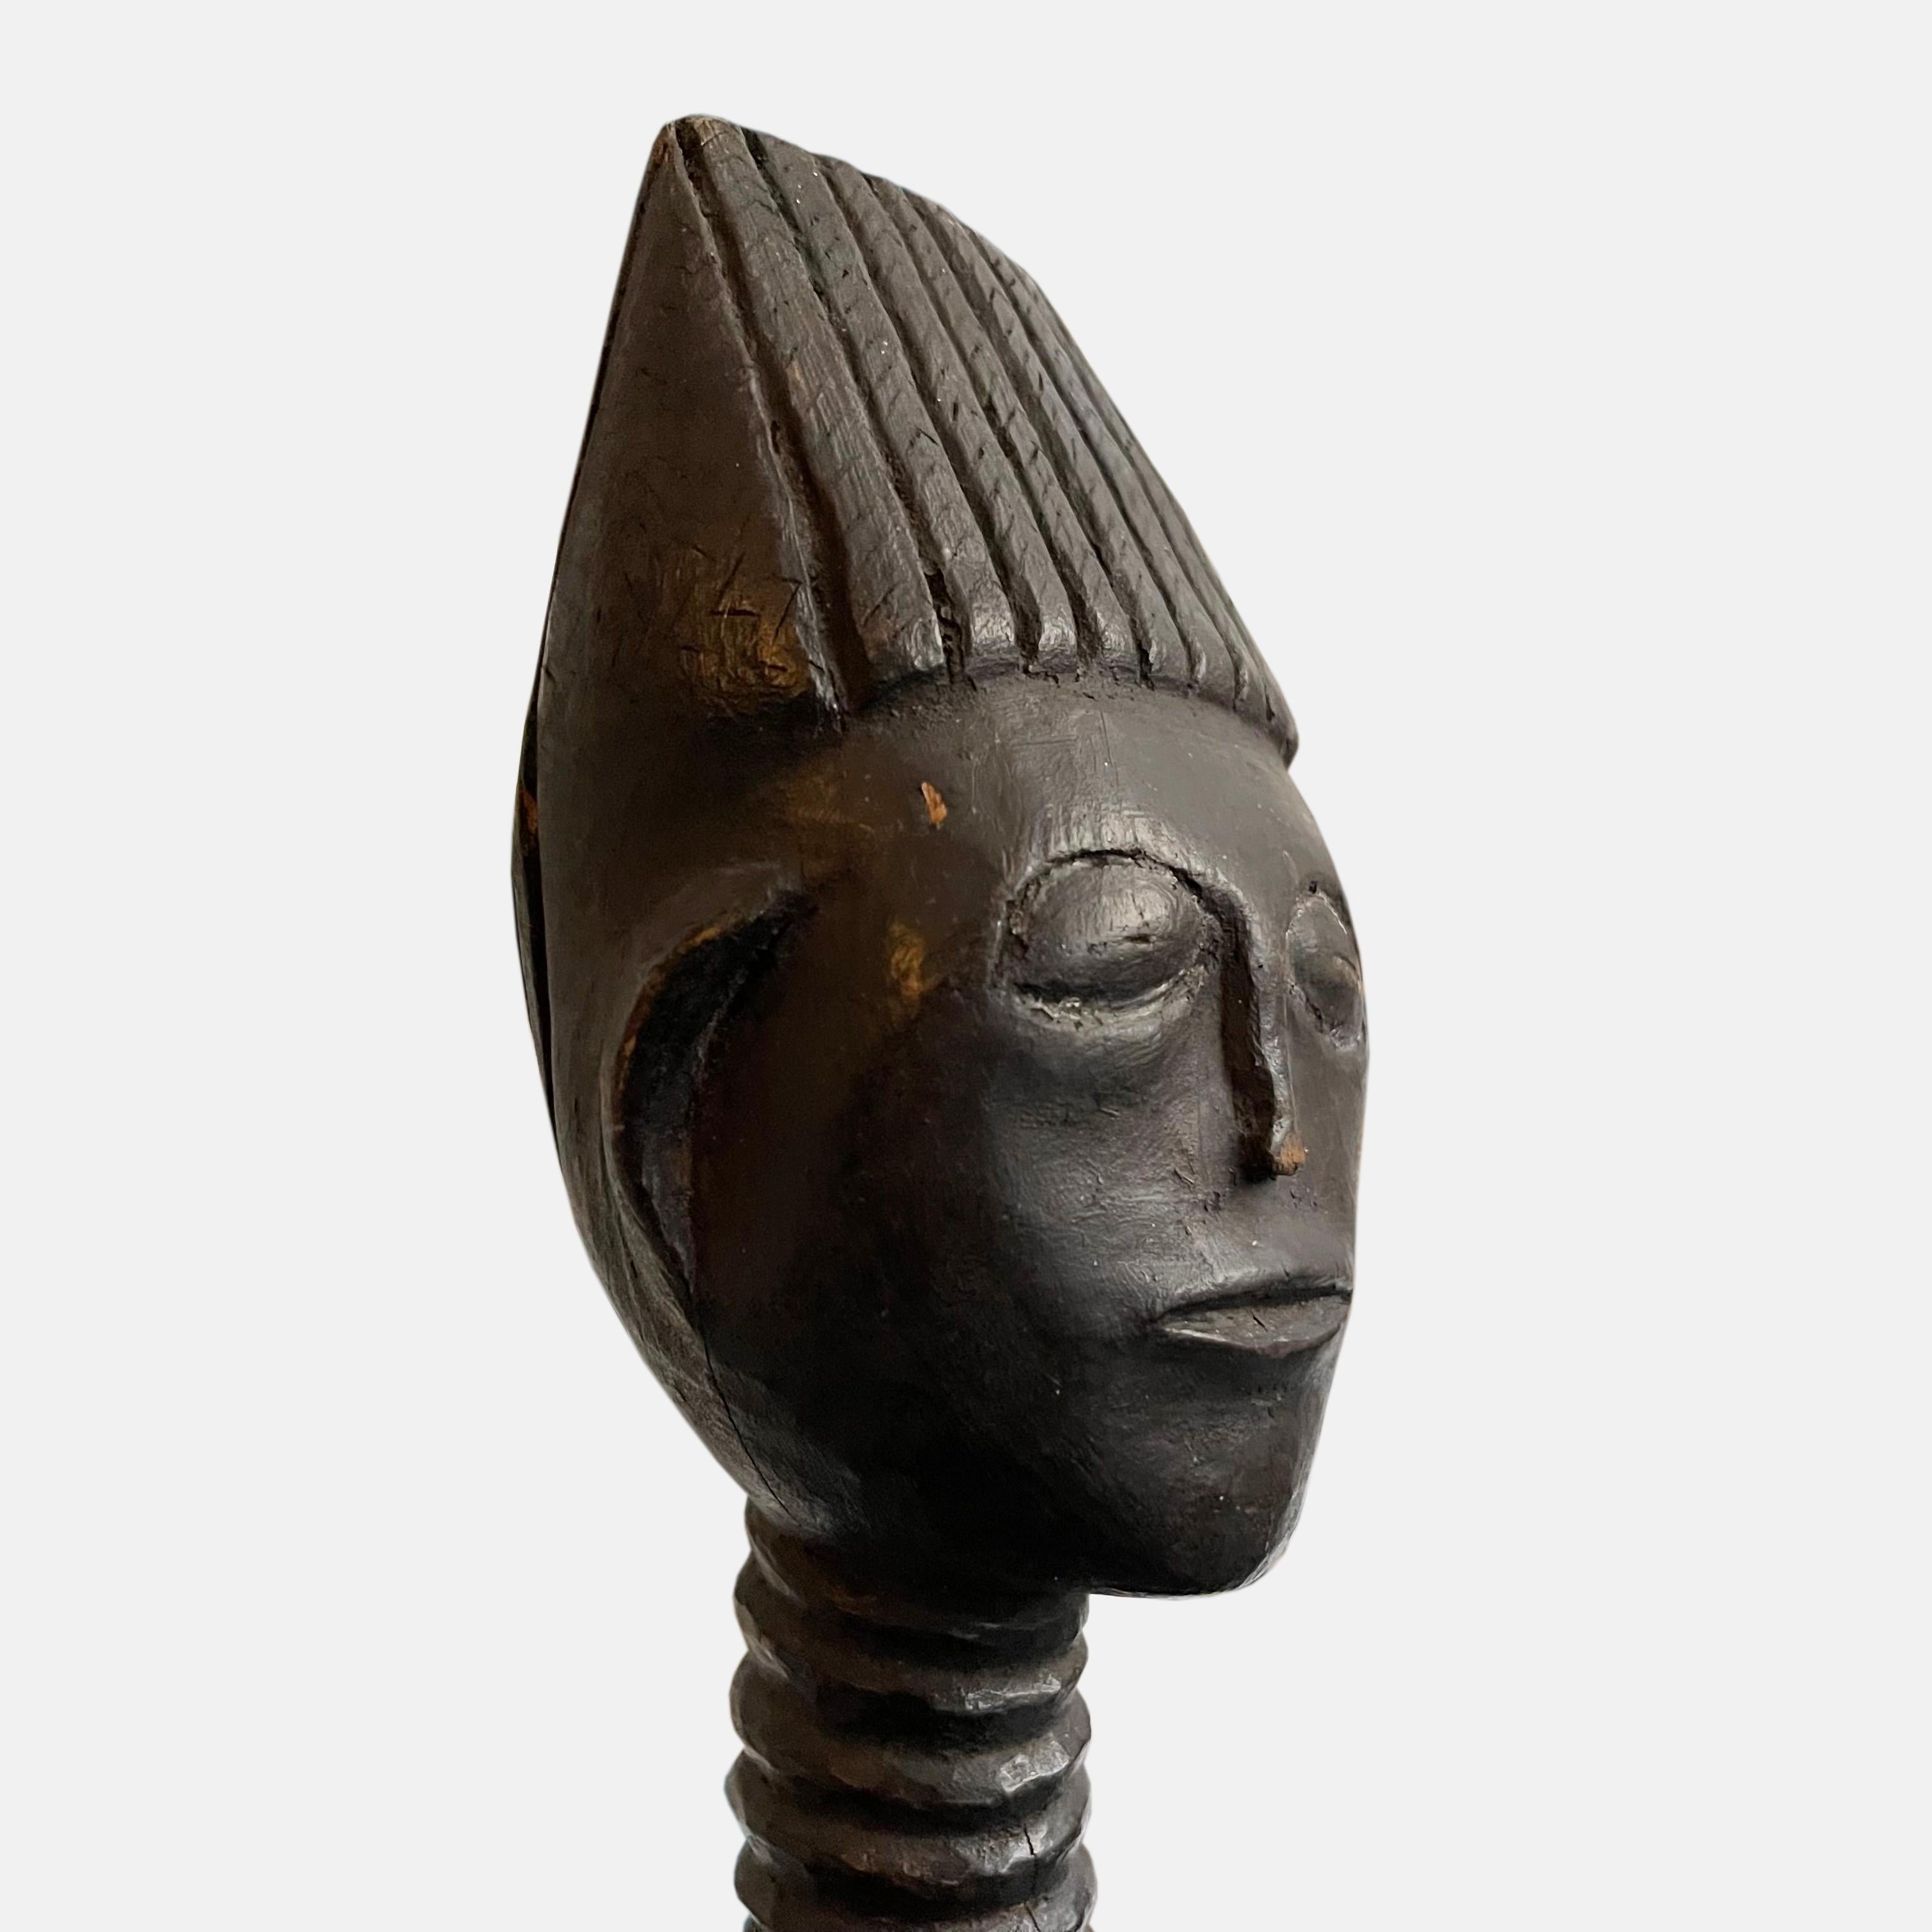 Koulango Female Ancestral Statue, Ivory Coast, Early 20th Century For Sale 1